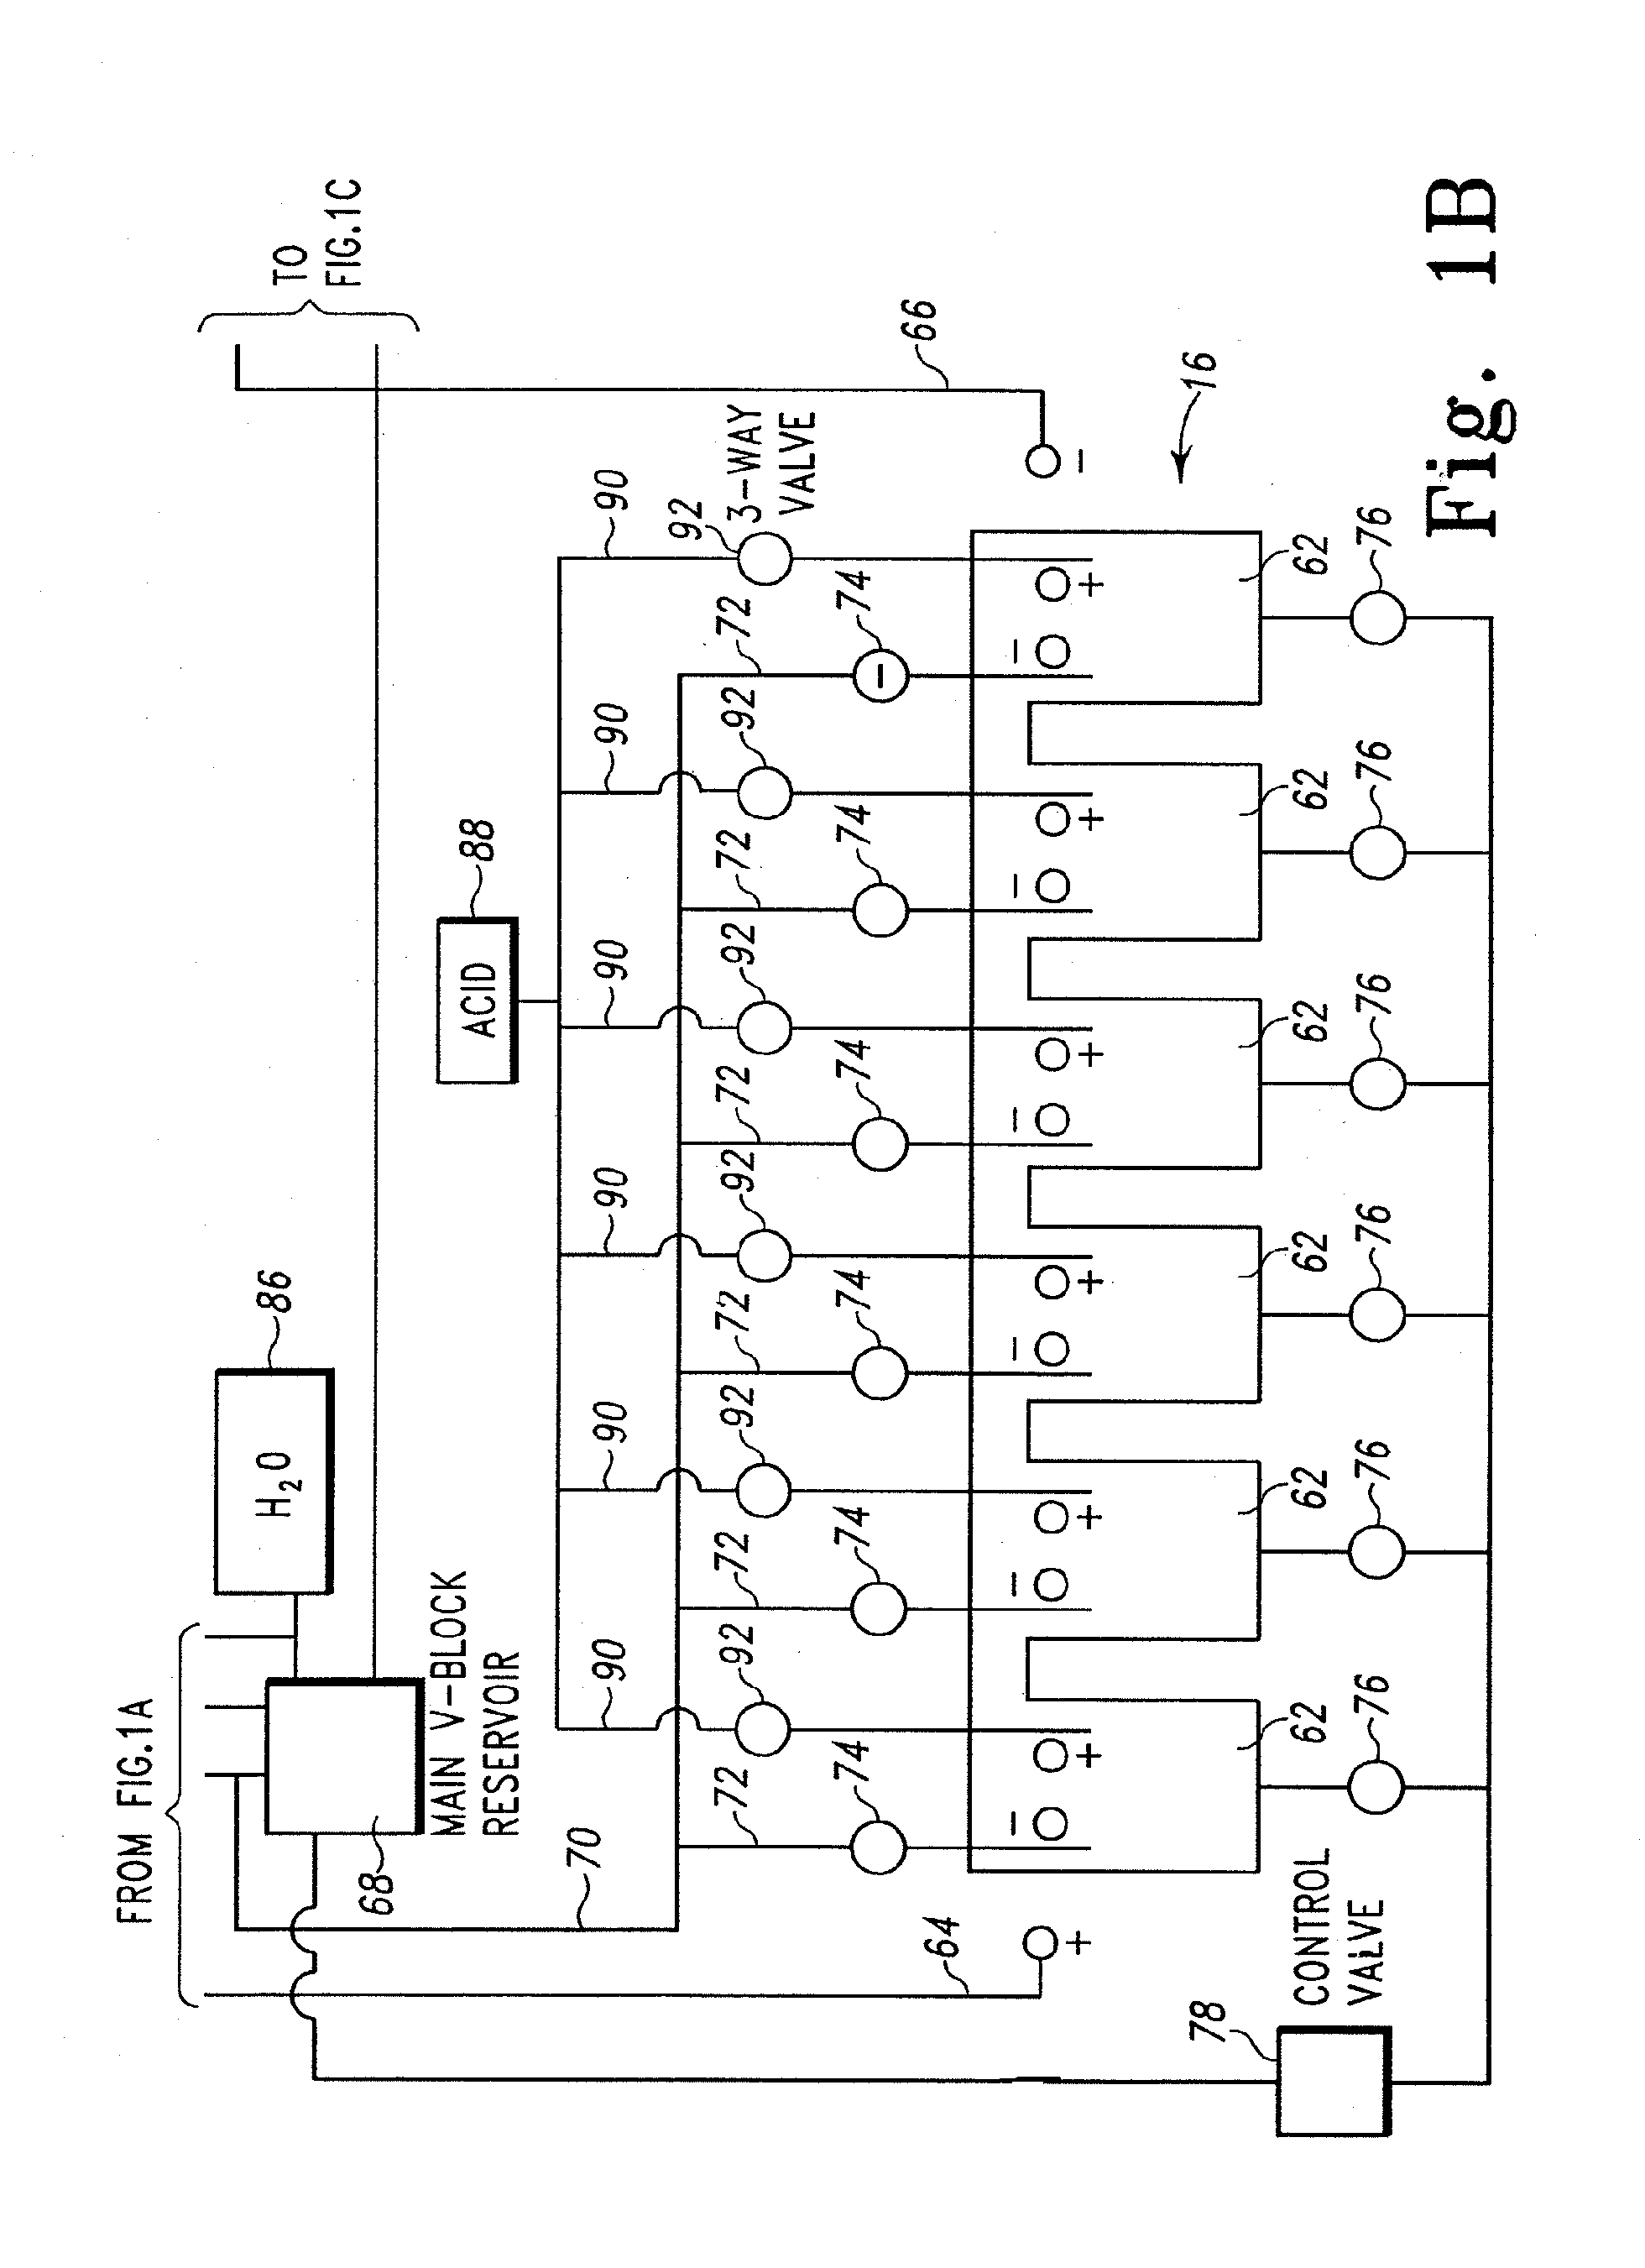 System including an electromagnetically energized piston motor designed to convert chemical and electrical energy to mechanical energy